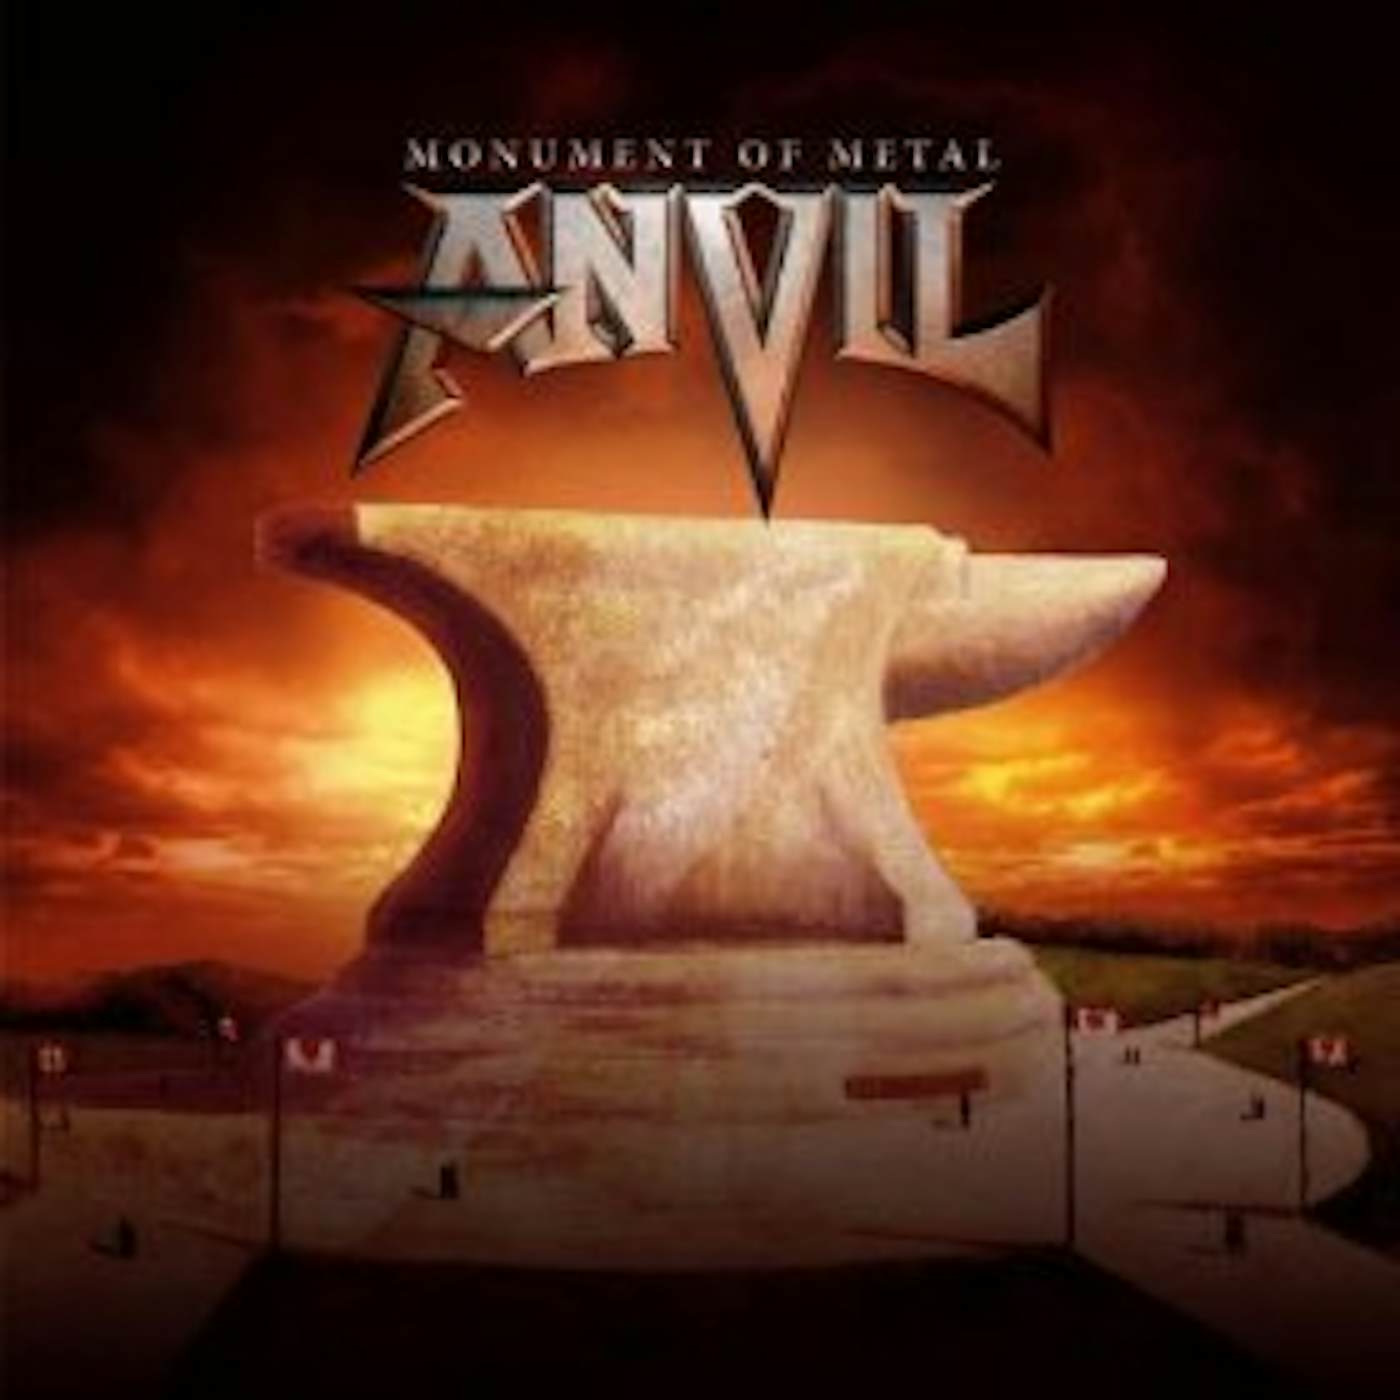 MONUMENT OF METAL: THE VERY BEST OF ANVIL CD